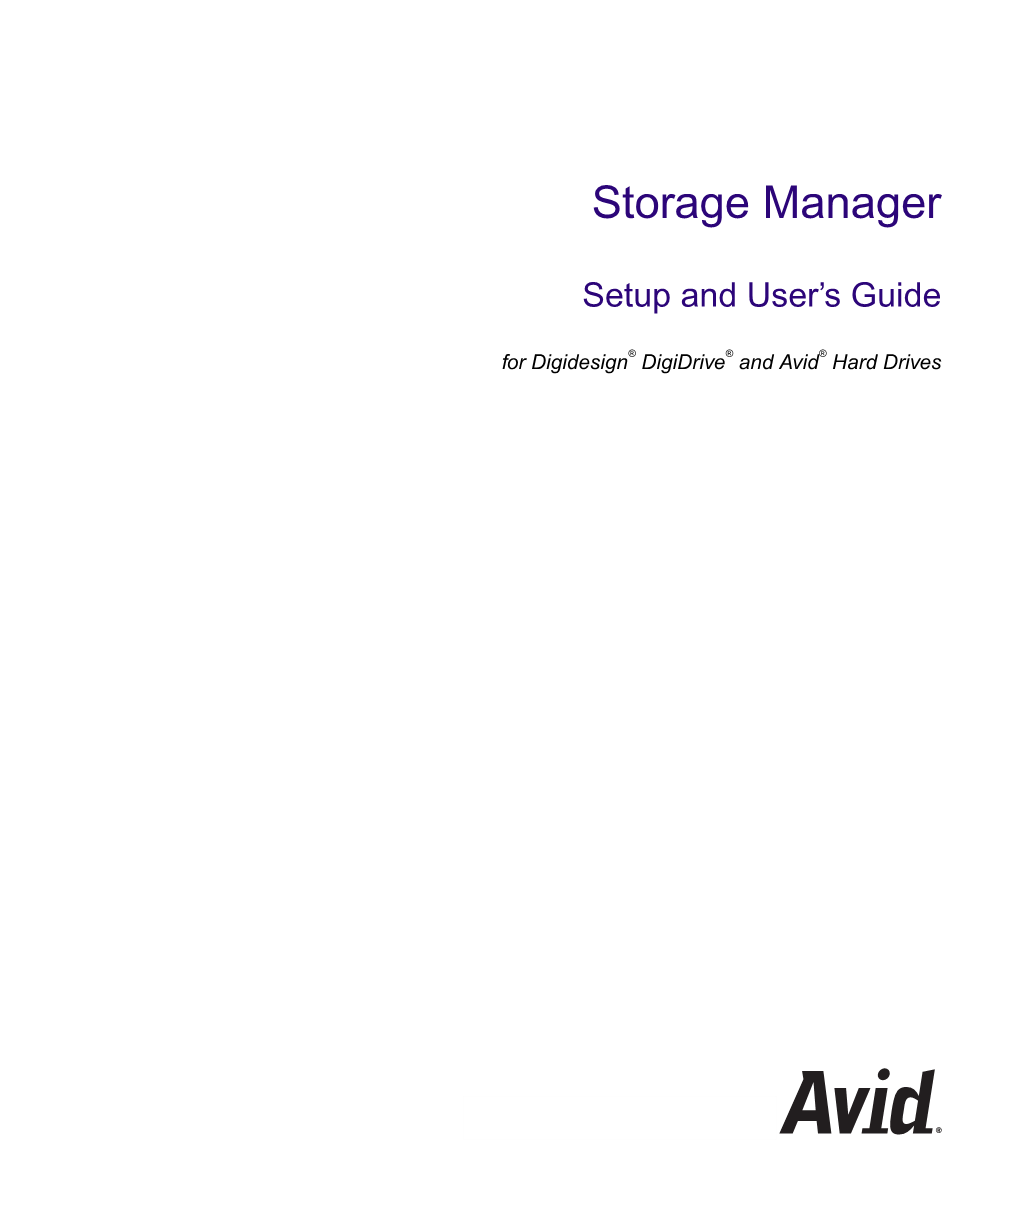 Avid Storage Manager Setup and User's Guide